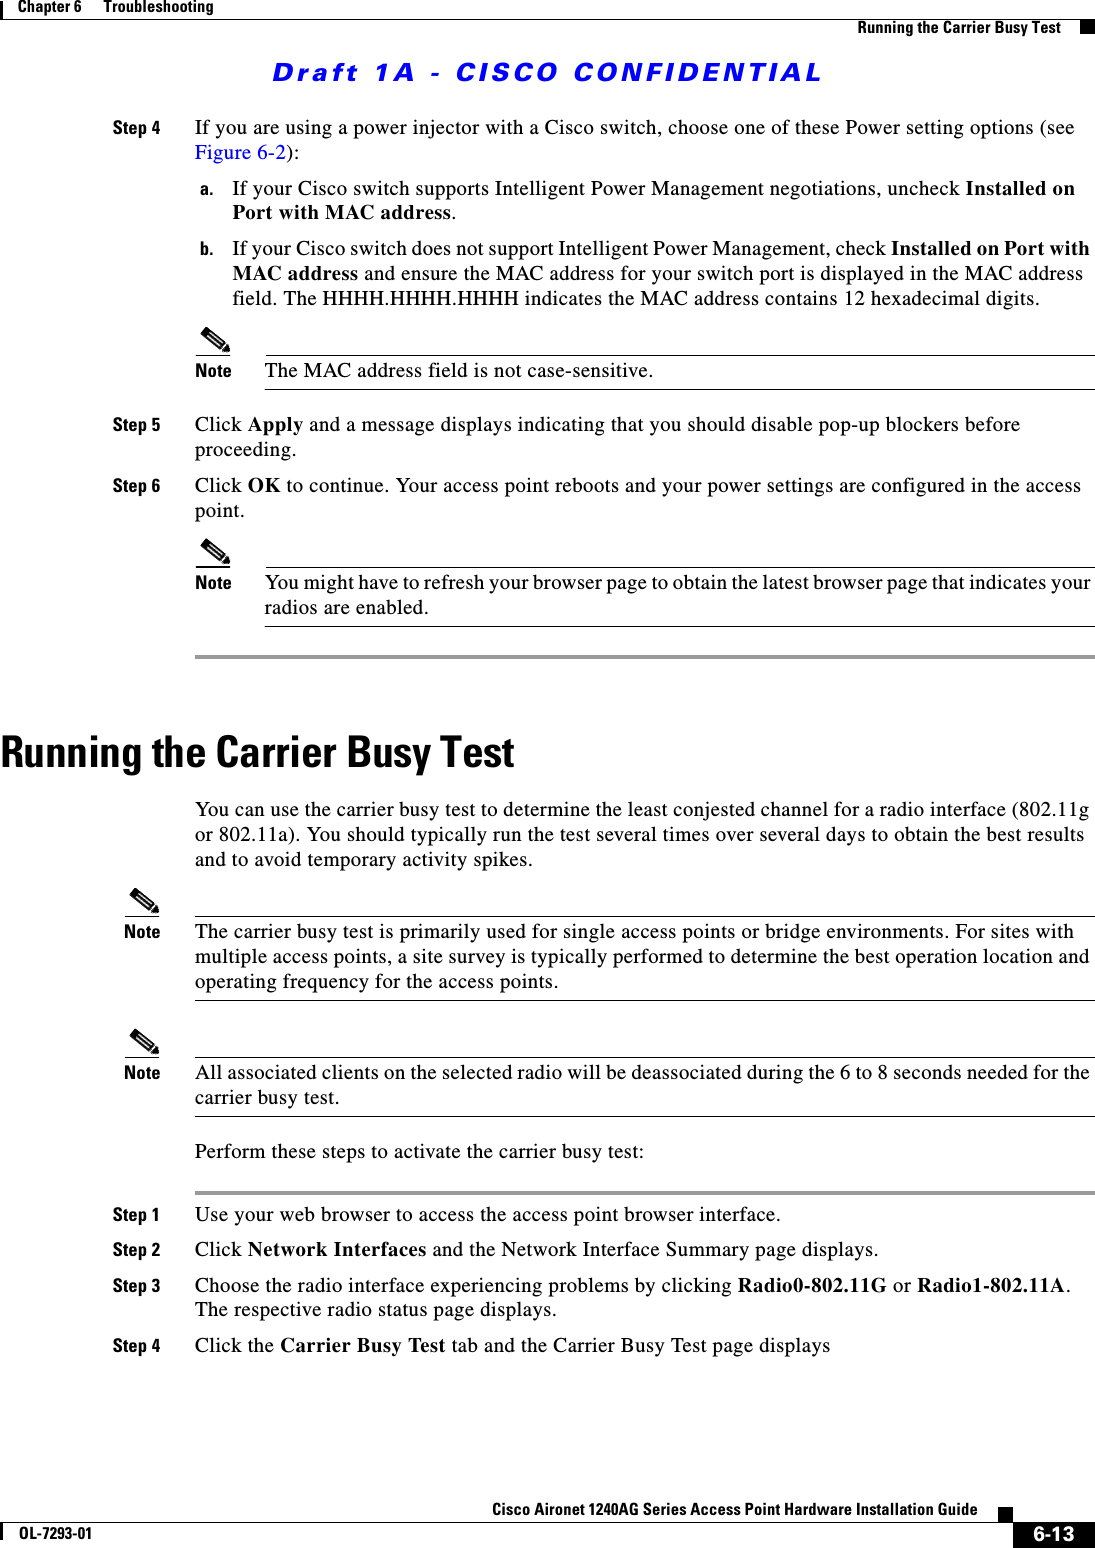 Draft 1A - CISCO CONFIDENTIAL6-13Cisco Aironet 1240AG Series Access Point Hardware Installation GuideOL-7293-01Chapter 6      TroubleshootingRunning the Carrier Busy TestStep 4 If you are using a power injector with a Cisco switch, choose one of these Power setting options (see Figure 6-2):a. If your Cisco switch supports Intelligent Power Management negotiations, uncheck Installed on Port with MAC address.b. If your Cisco switch does not support Intelligent Power Management, check Installed on Port with MAC address and ensure the MAC address for your switch port is displayed in the MAC address field. The HHHH.HHHH.HHHH indicates the MAC address contains 12 hexadecimal digits. Note The MAC address field is not case-sensitive.Step 5 Click Apply and a message displays indicating that you should disable pop-up blockers before proceeding.Step 6 Click OK to continue. Your access point reboots and your power settings are configured in the access point.Note You might have to refresh your browser page to obtain the latest browser page that indicates your radios are enabled.Running the Carrier Busy TestYou can use the carrier busy test to determine the least conjested channel for a radio interface (802.11g or 802.11a). You should typically run the test several times over several days to obtain the best results and to avoid temporary activity spikes.Note The carrier busy test is primarily used for single access points or bridge environments. For sites with multiple access points, a site survey is typically performed to determine the best operation location and operating frequency for the access points. Note All associated clients on the selected radio will be deassociated during the 6 to 8 seconds needed for the carrier busy test. Perform these steps to activate the carrier busy test:Step 1 Use your web browser to access the access point browser interface.Step 2 Click Network Interfaces and the Network Interface Summary page displays.Step 3 Choose the radio interface experiencing problems by clicking Radio0-802.11G or Radio1-802.11A. The respective radio status page displays.Step 4 Click the Carrier Busy Test tab and the Carrier Busy Test page displays